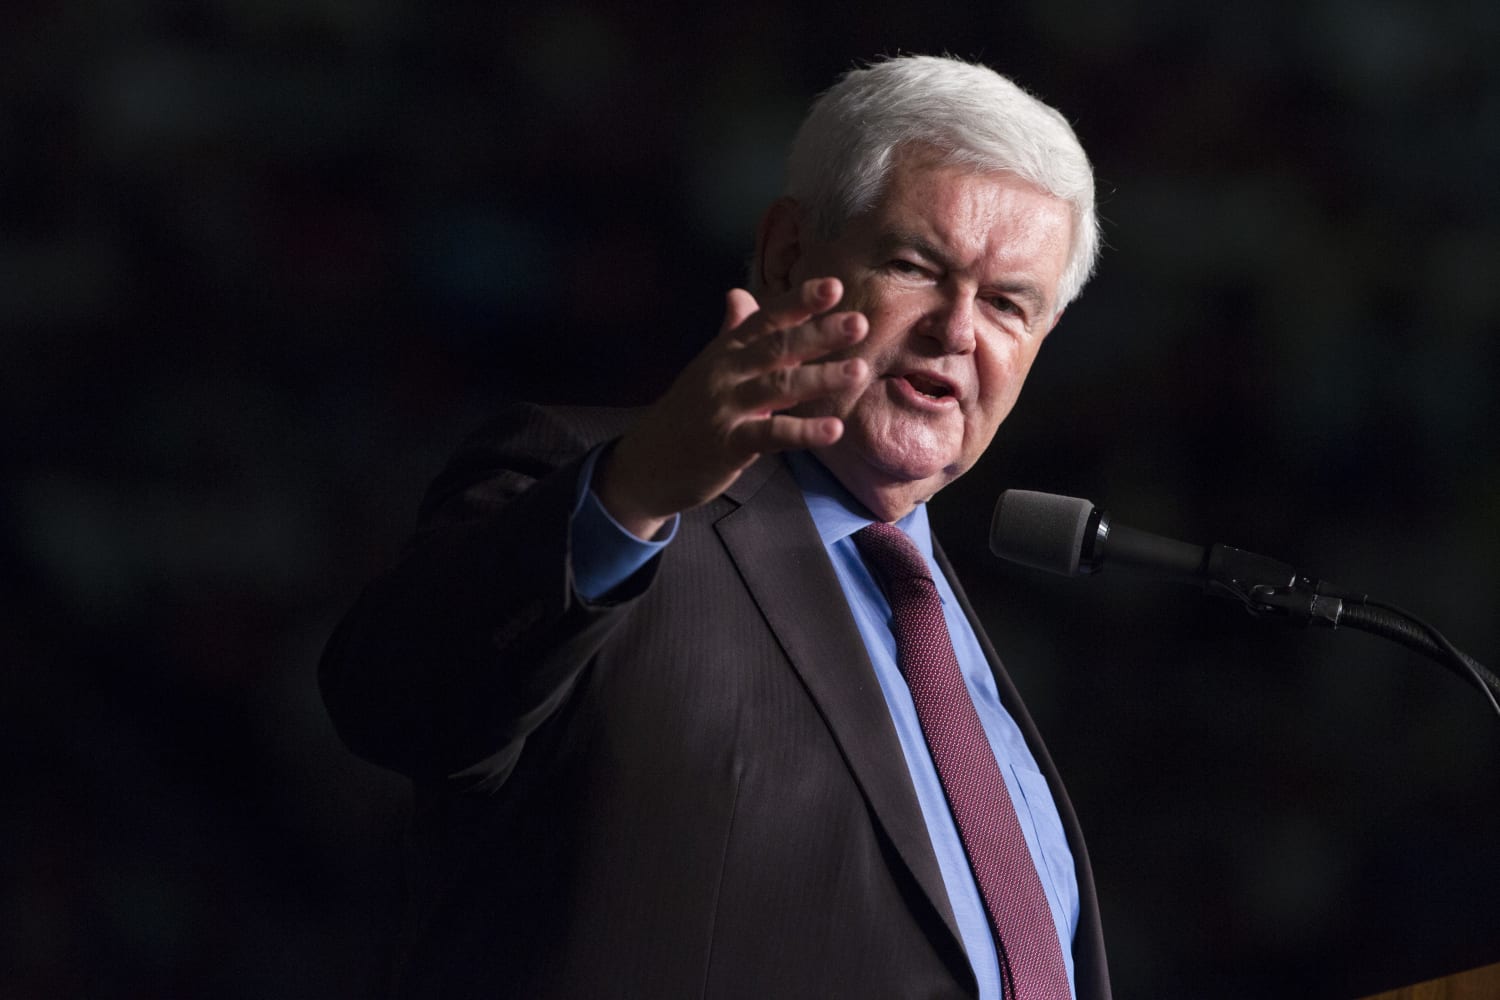 Why Newt Gingrich's rant about the Jan. 6 investigation matters